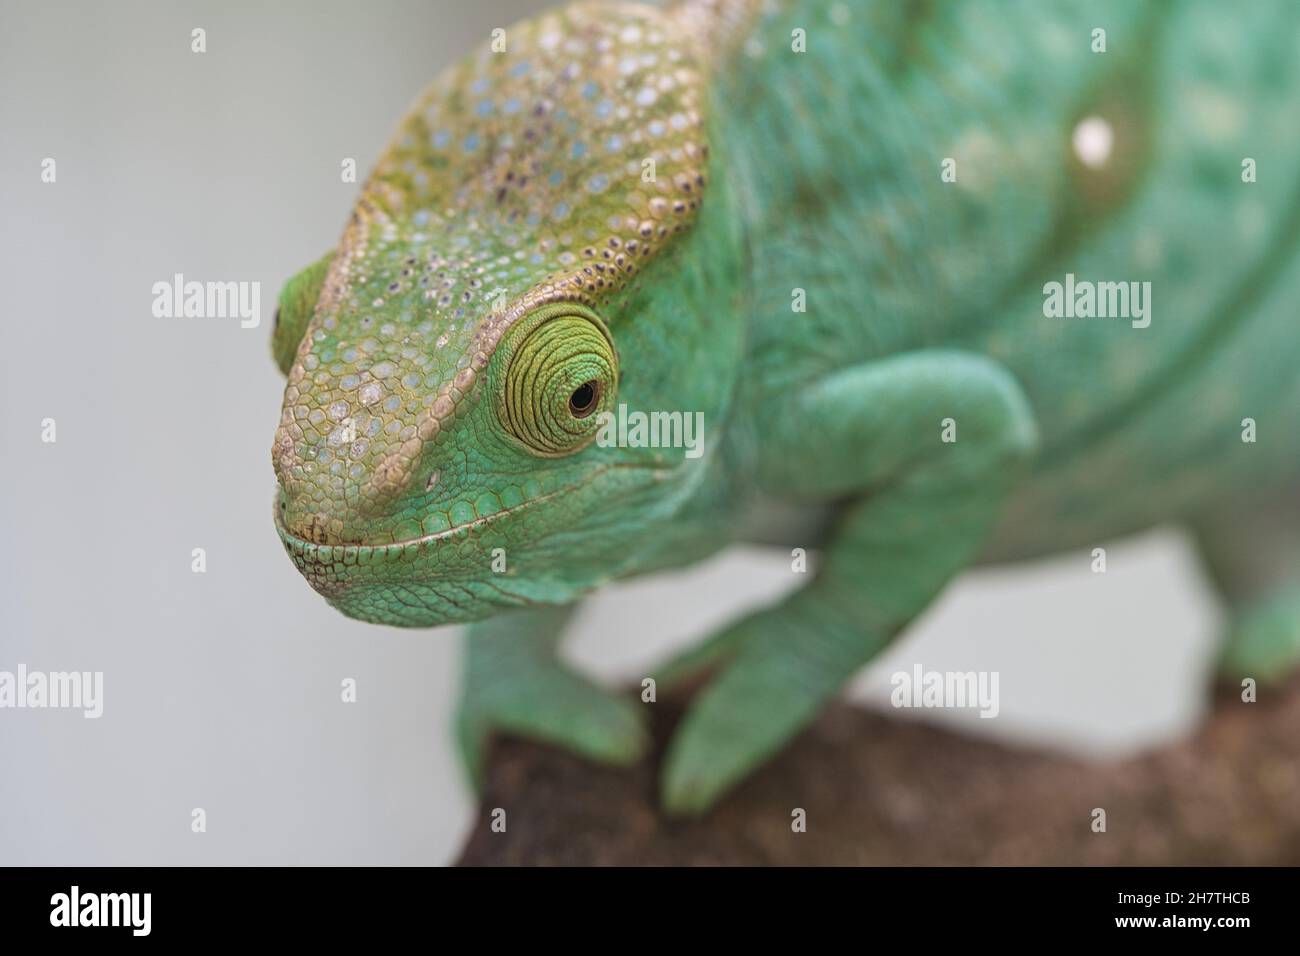 Chameleon on a branch with eye contact with the viewer. Green, yellow, red scales. Detailed close-up of the interesting reptile. Stock Photo